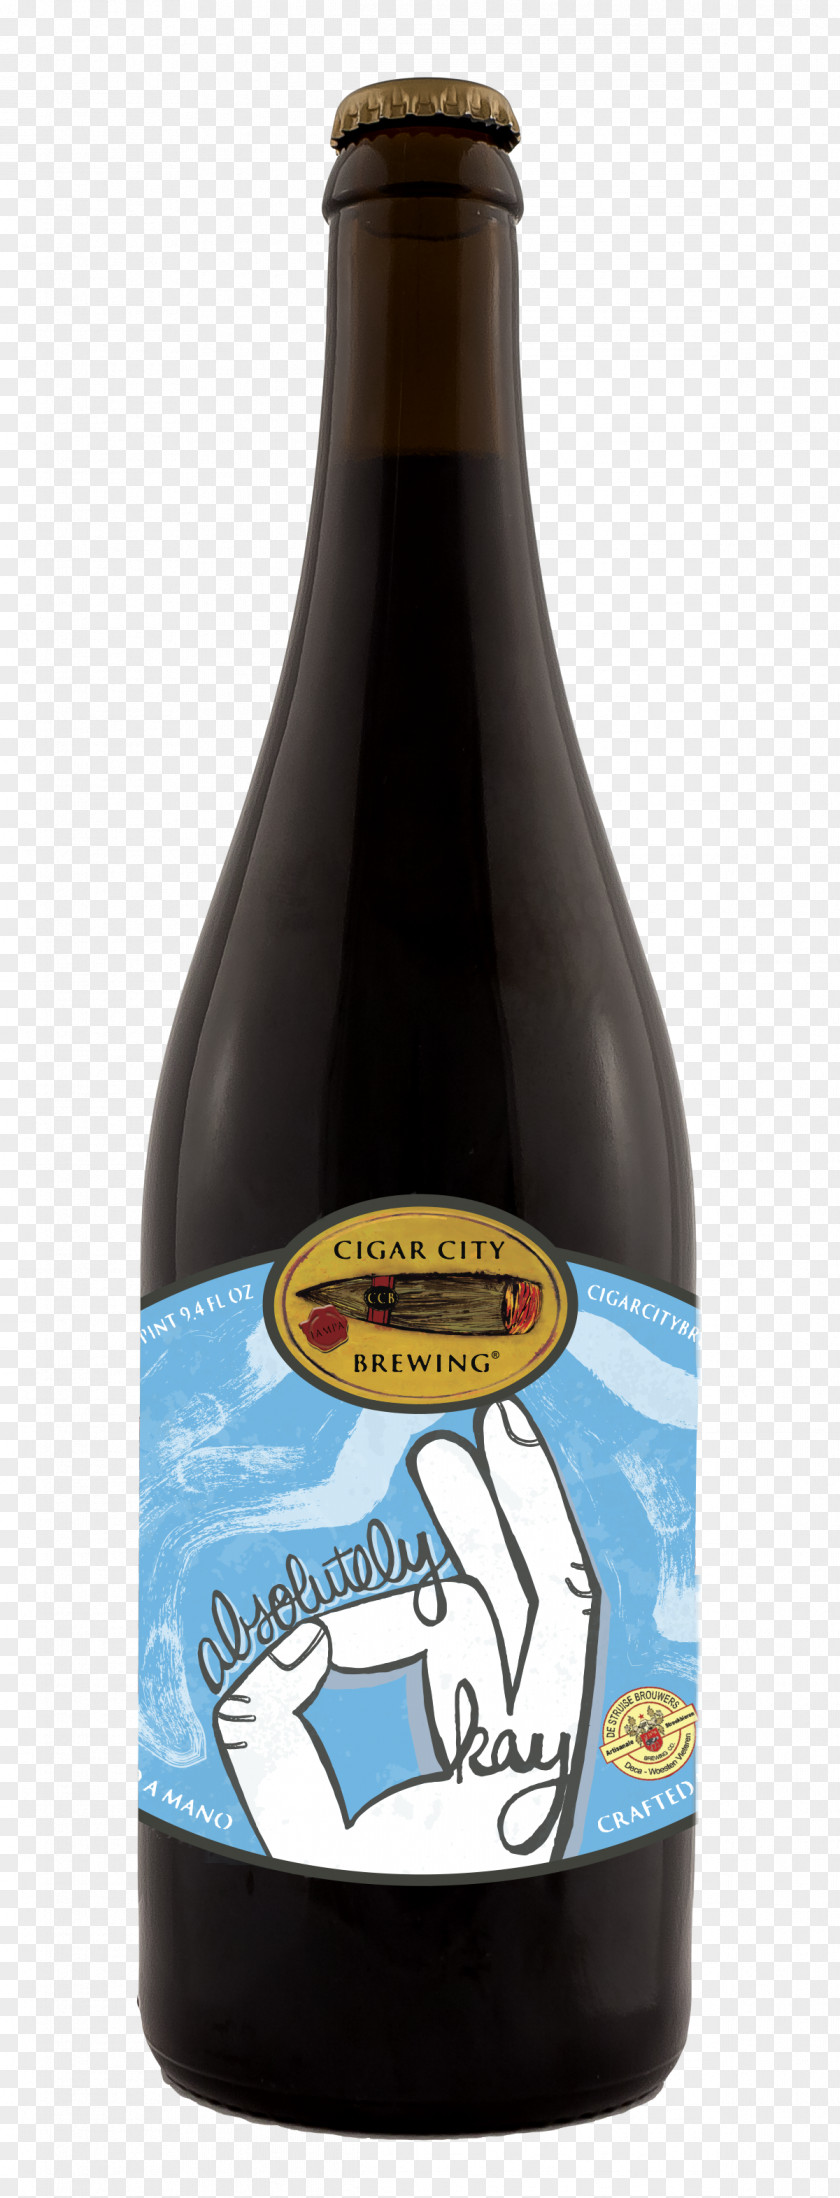 Beer Bottle Russian Imperial Stout Cream Ale PNG